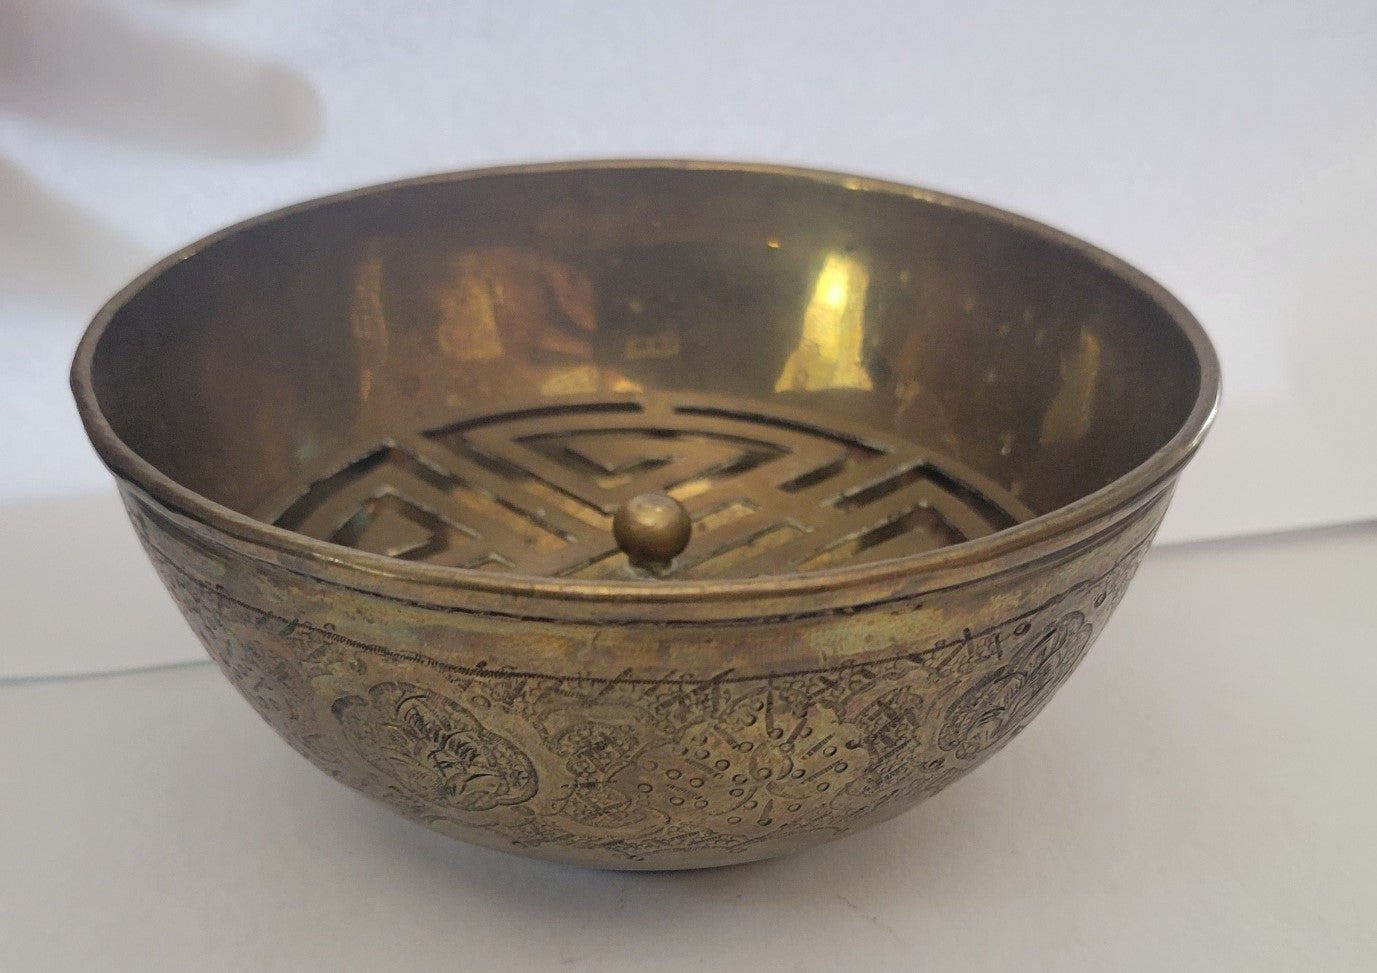 Vintage brass incense bowl with insert and engravings, front view.